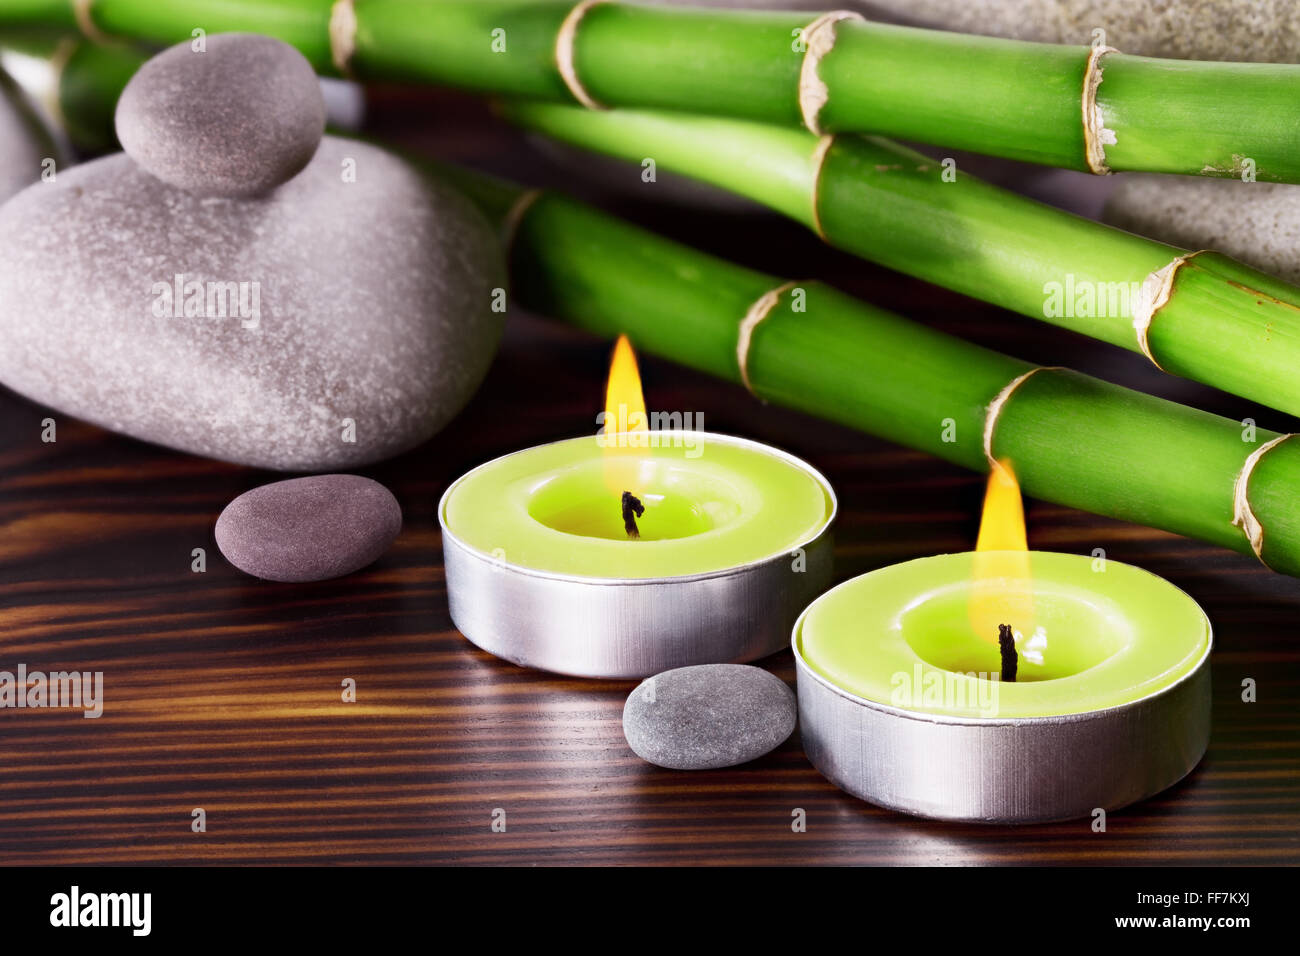 Spa Stones with bamboo on a wooden surface Stock Photo